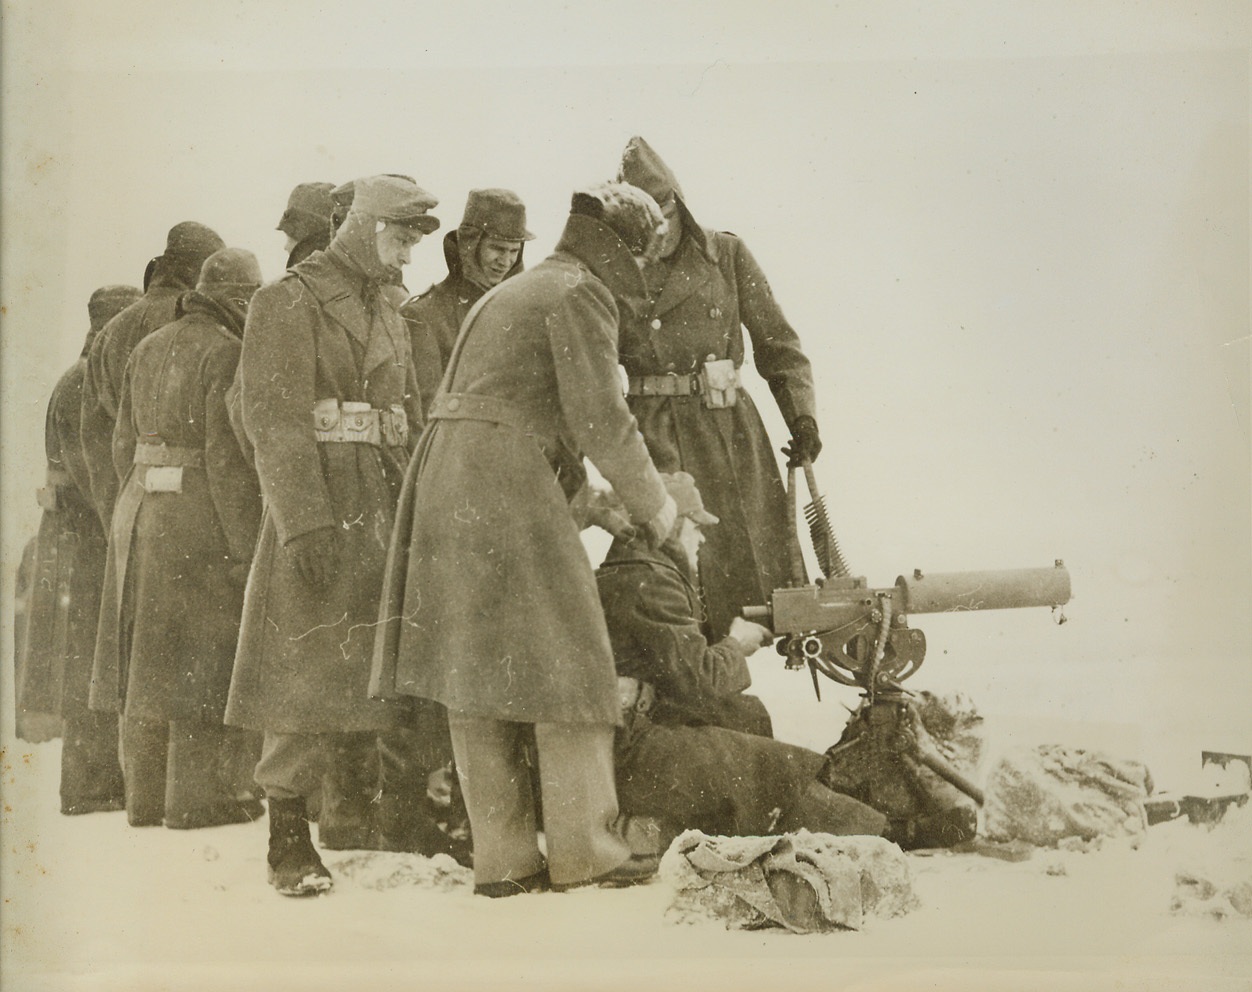 U.S. Army Trains for Winter Fighting, 12/28/1940  PLATTSBURG BARRACKS, N.Y. – Army officials haven’t overlooked the phase of winter fighting. At Plattsburg Barracks, N.Y., a group of recruits look on as another fires a machine gun in subzero temperature along the shore of Lake Champlain. The instructor (directly behind the gunner) is Lieut. Albert R. Cupello, of the 26th Infantry. Credit: (ACME);